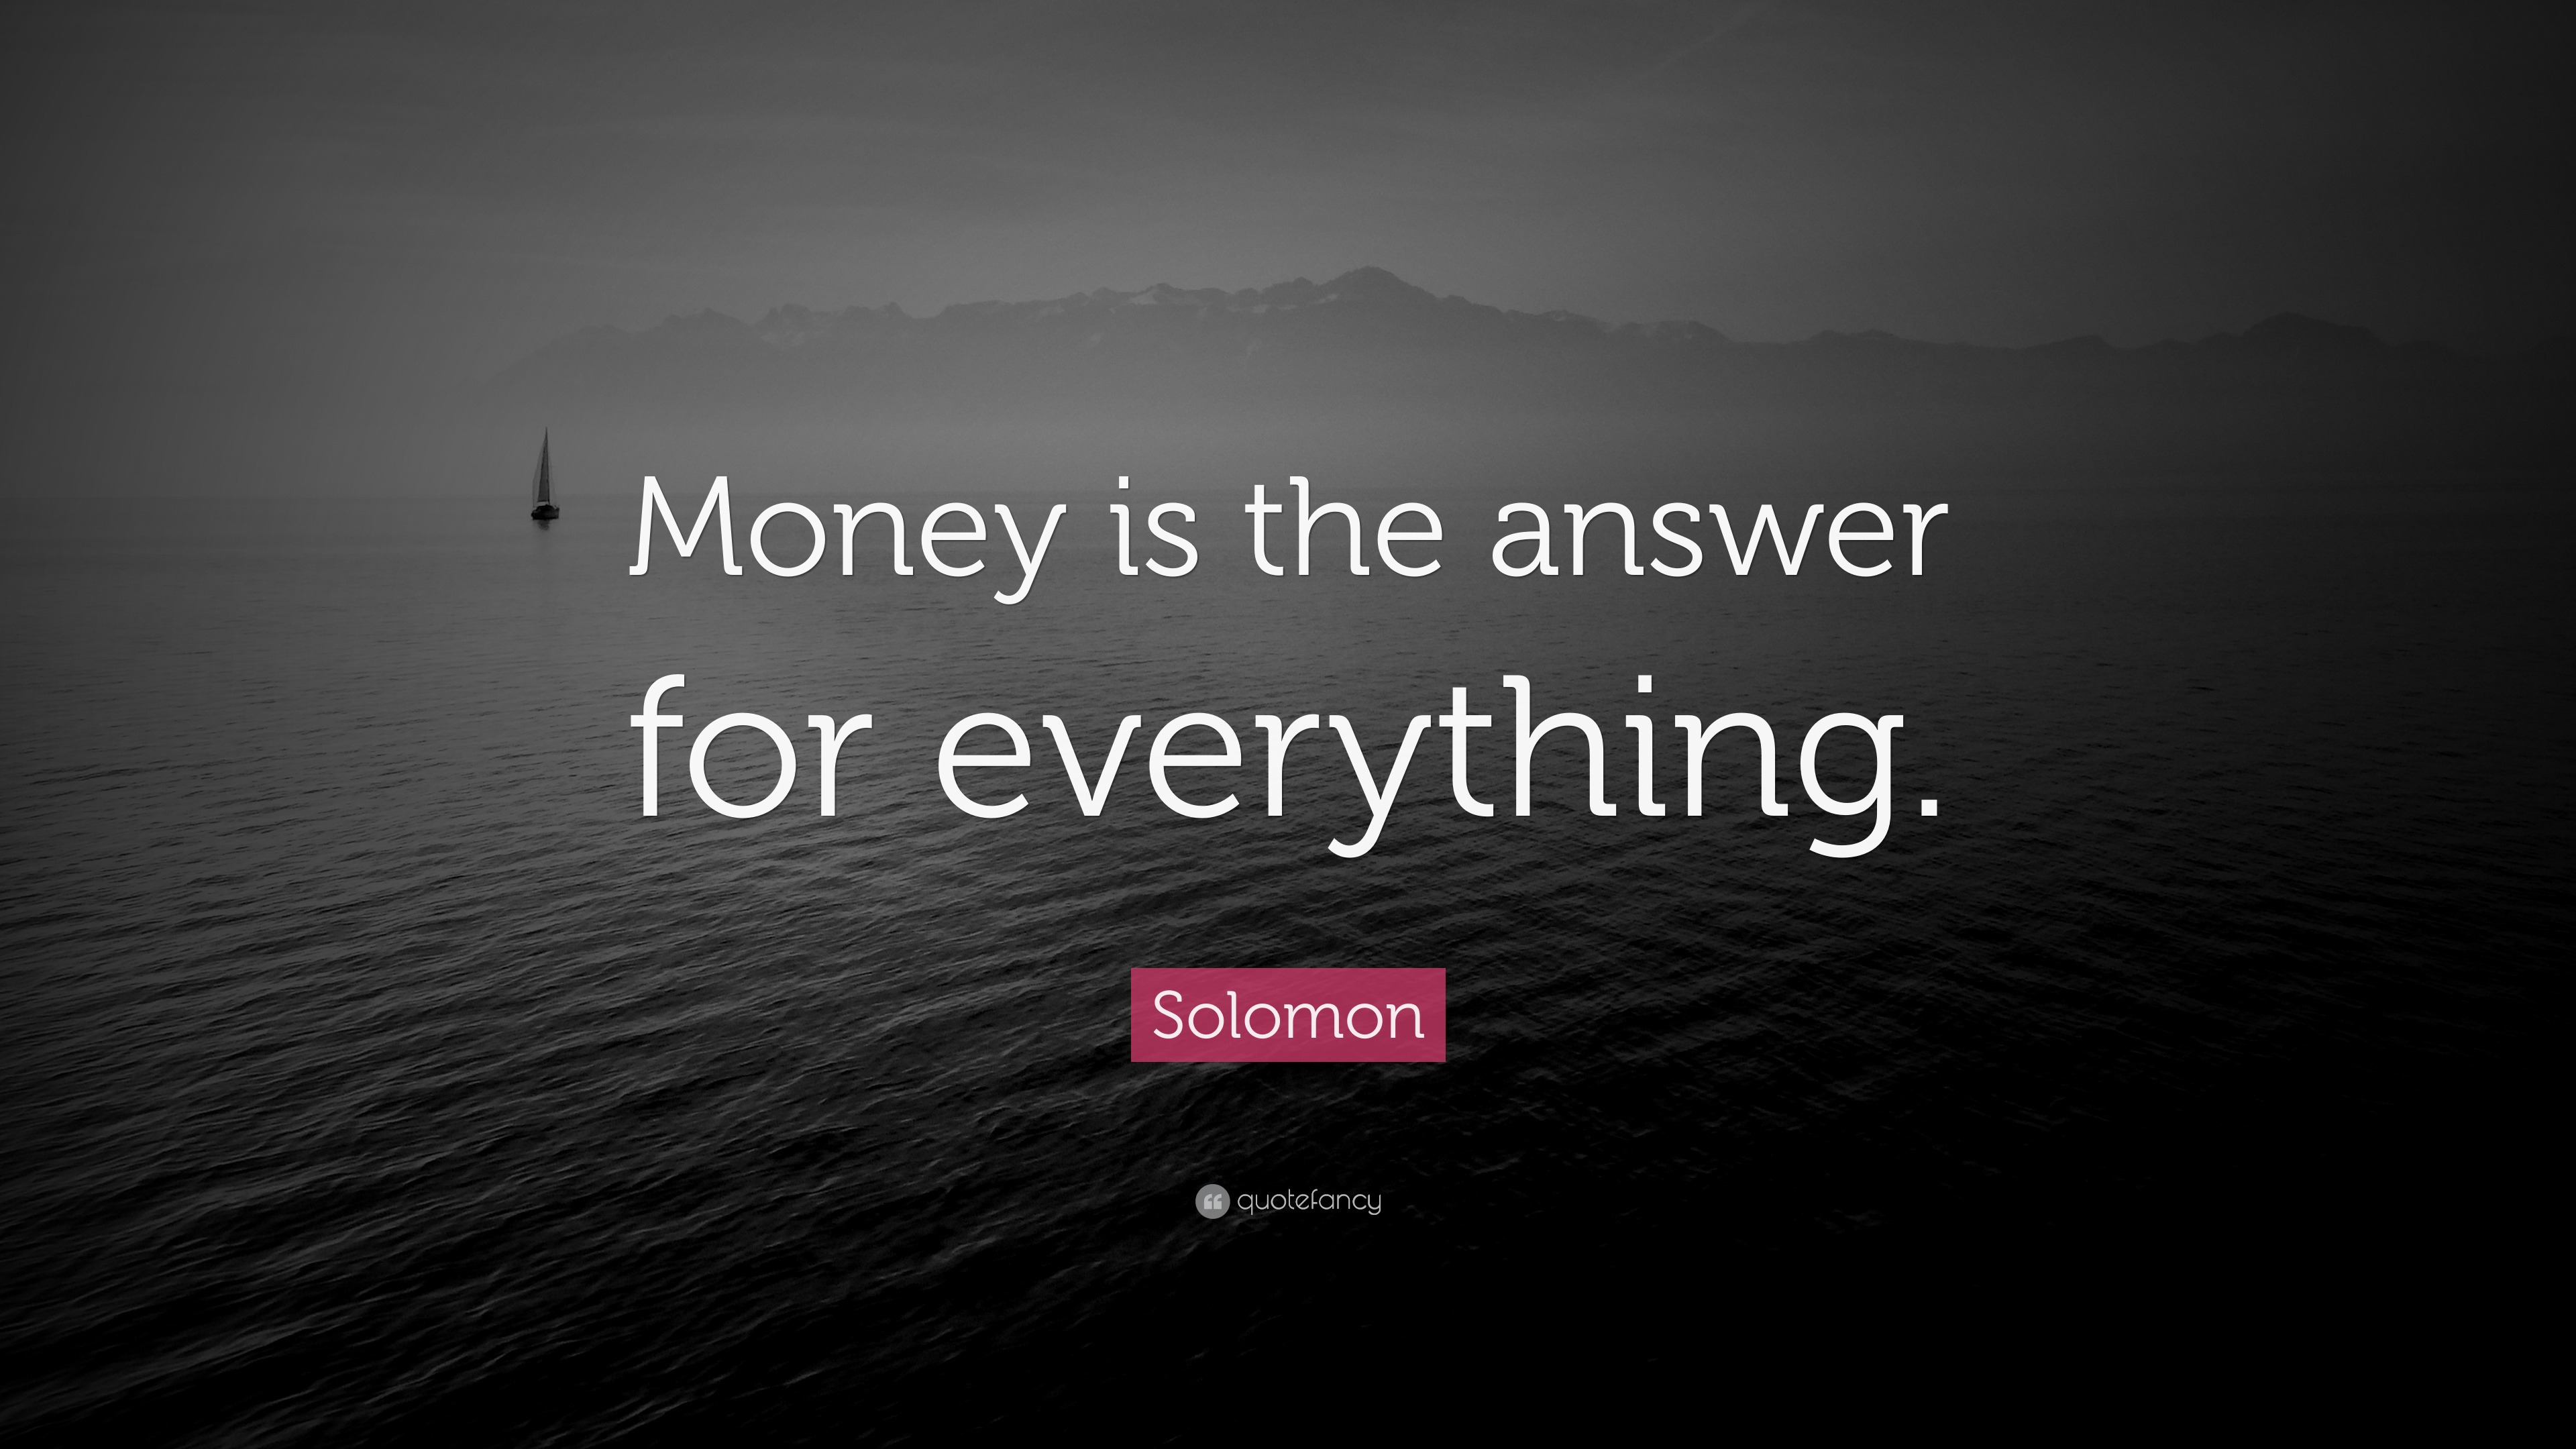 Solomon Quote “Money is the answer for everything.”